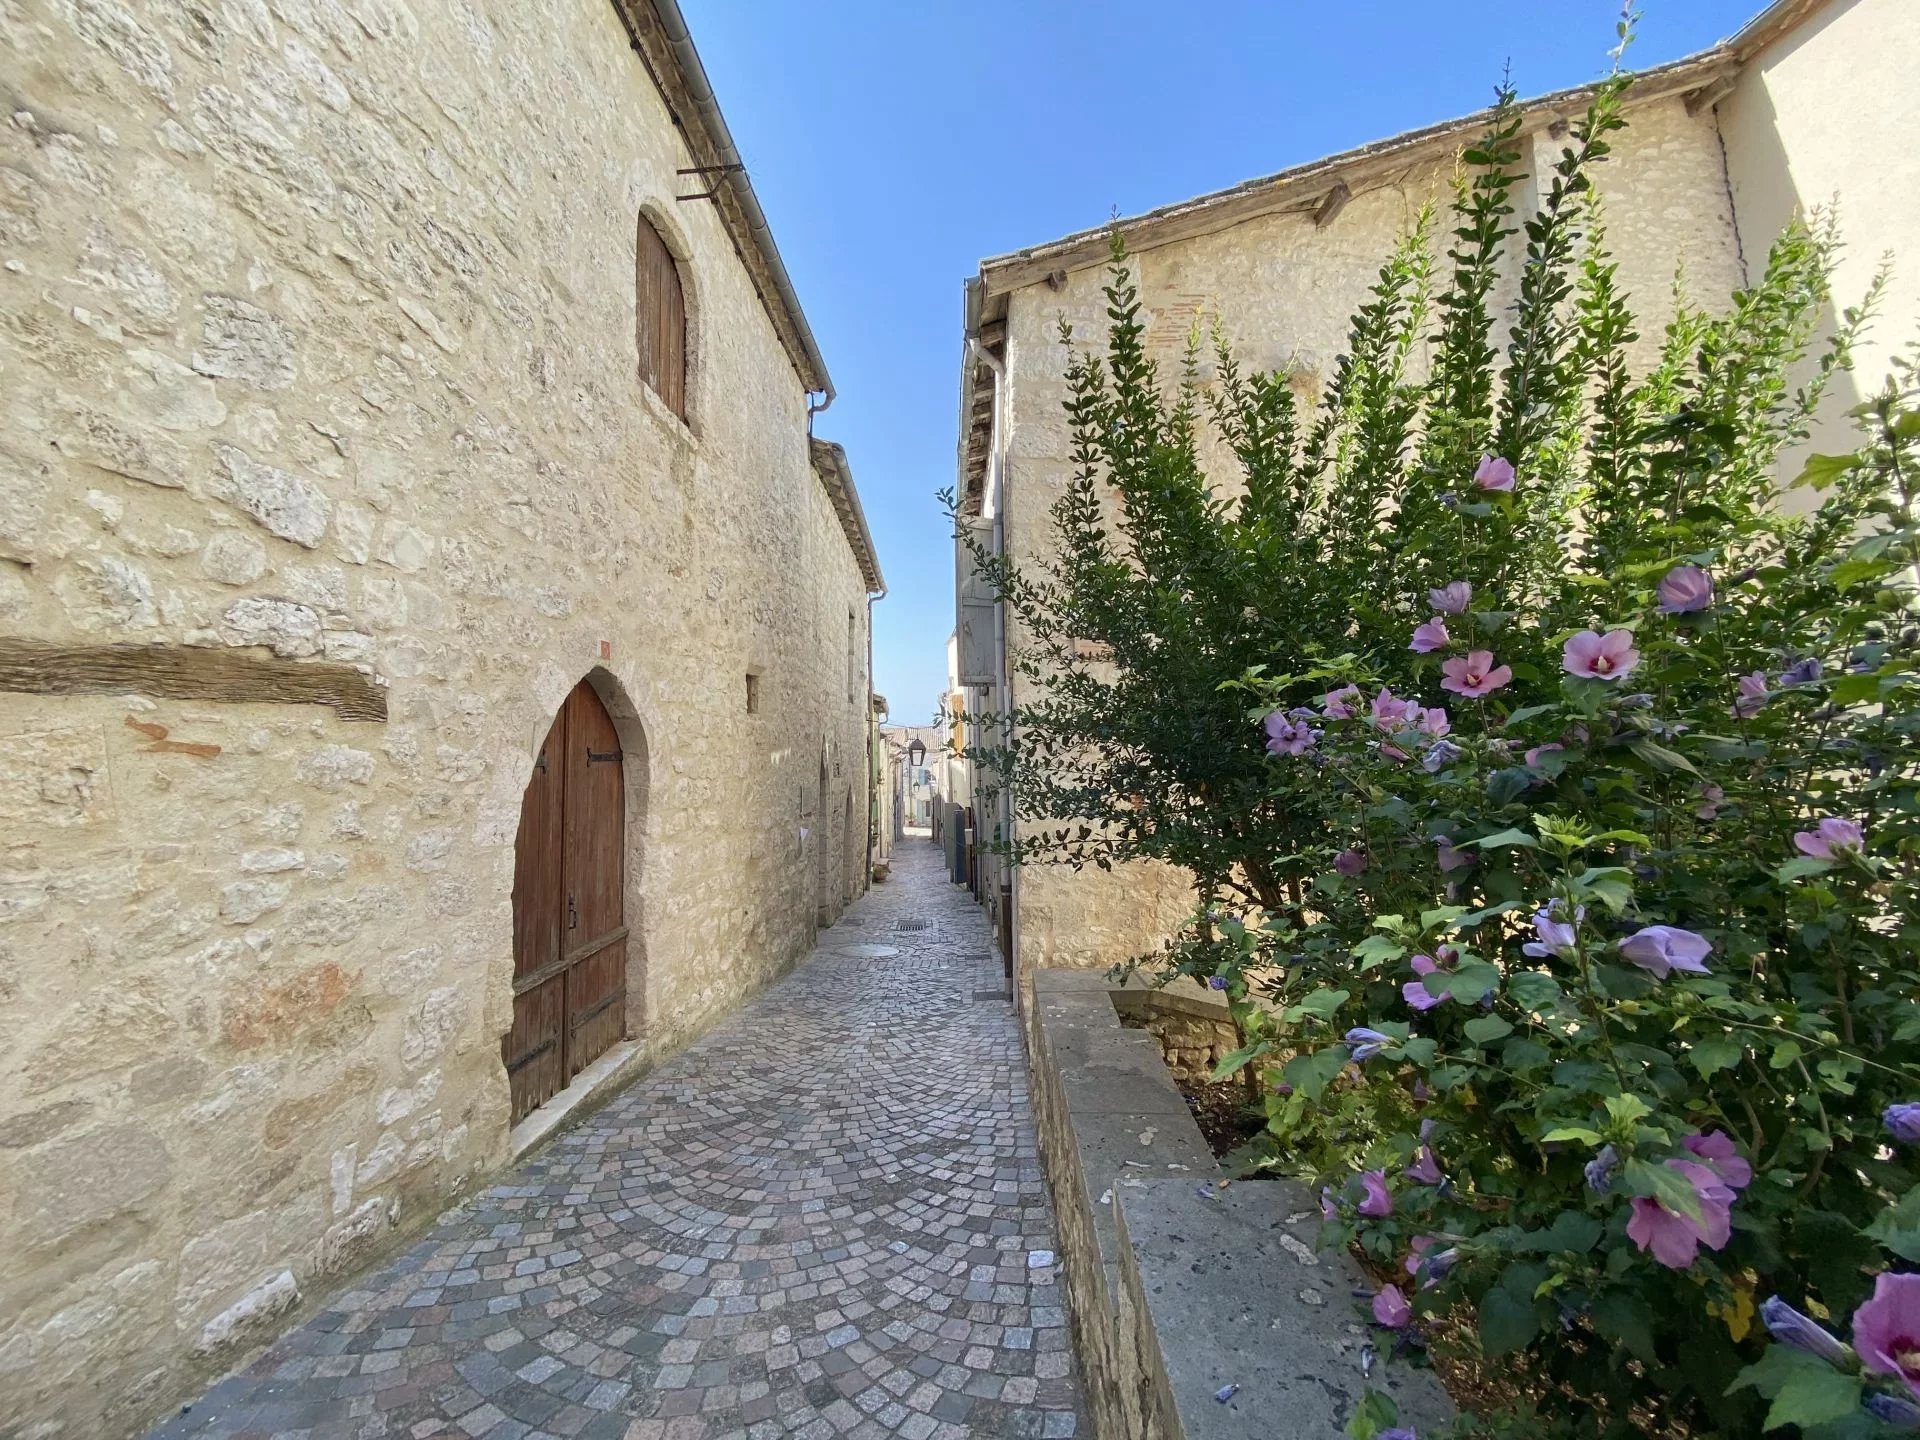 Investment property in the heart of the charming bastide town of Monflanquin